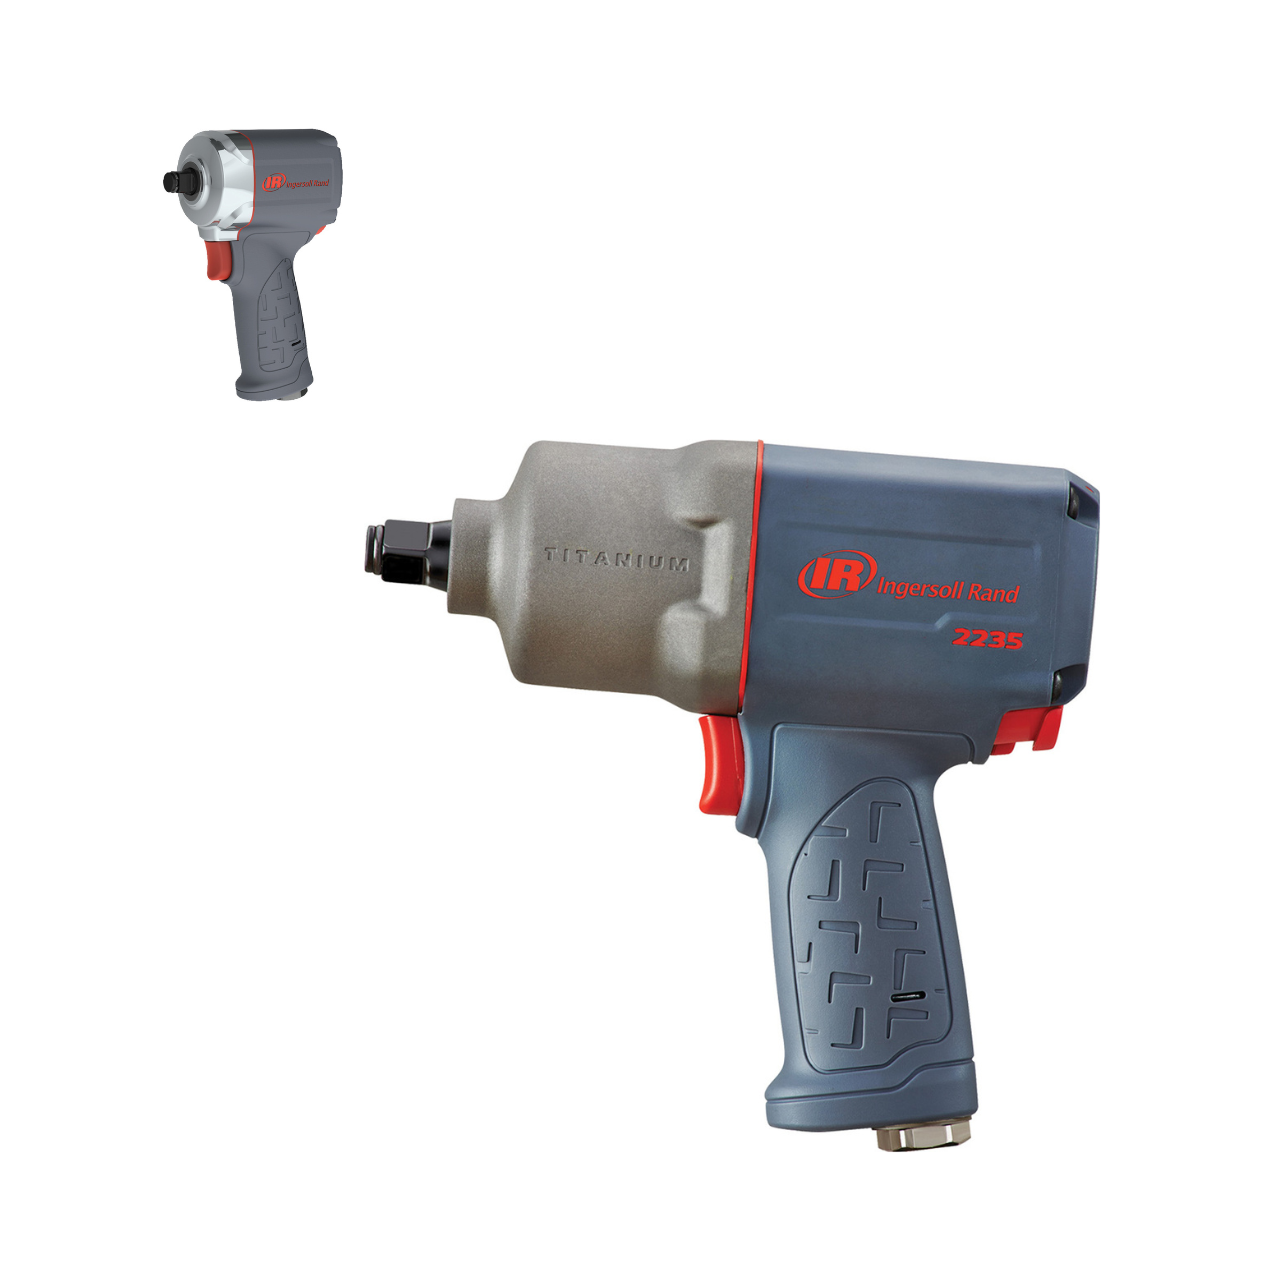 Ingersoll Rand 2235TIMAX 1/2" Square Air Impactool + FREE Ingersoll Rand 36QMAX 1/2" Impact Wrench